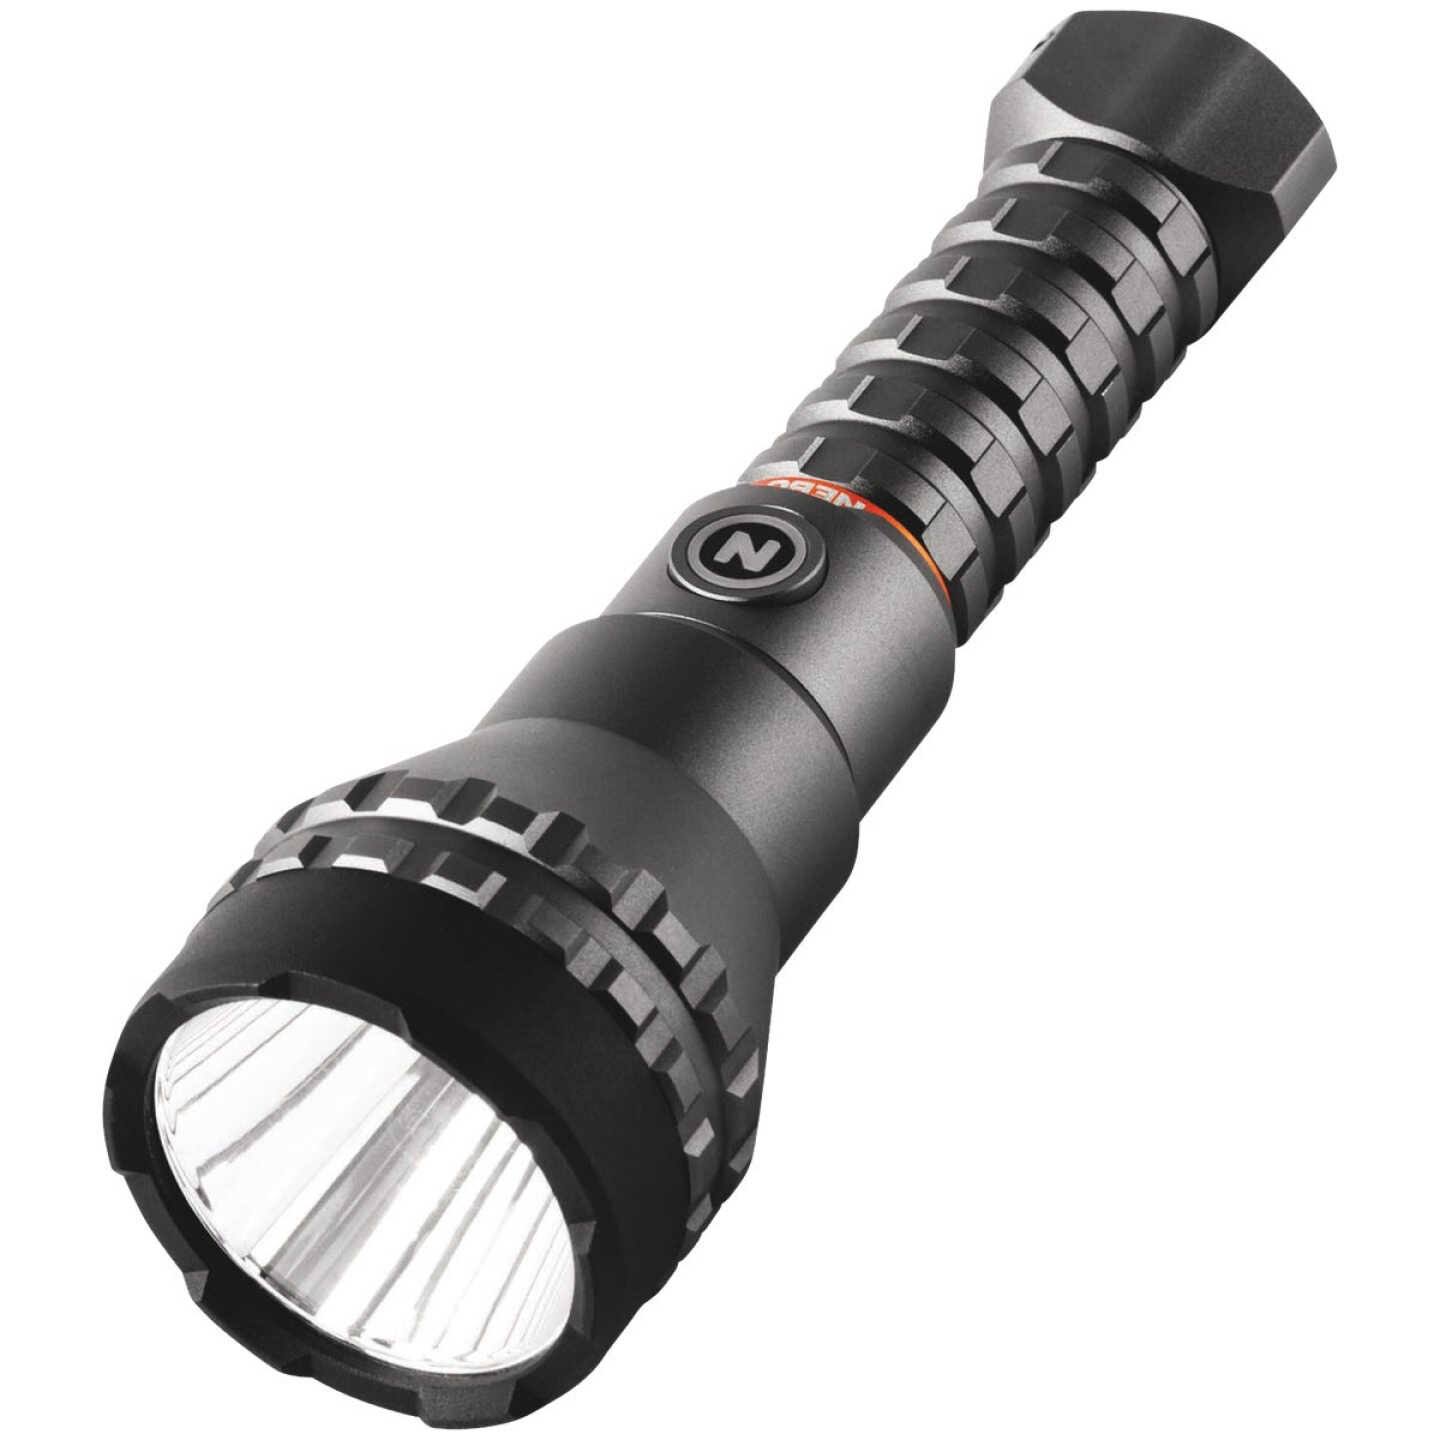 Nebo Luxtreme 500-Lumen LED Flashlight –Bright Rechargeable Flashlight With 4 Light Modes, Water Resistance, Half Mile Light Beam, Storm Gray